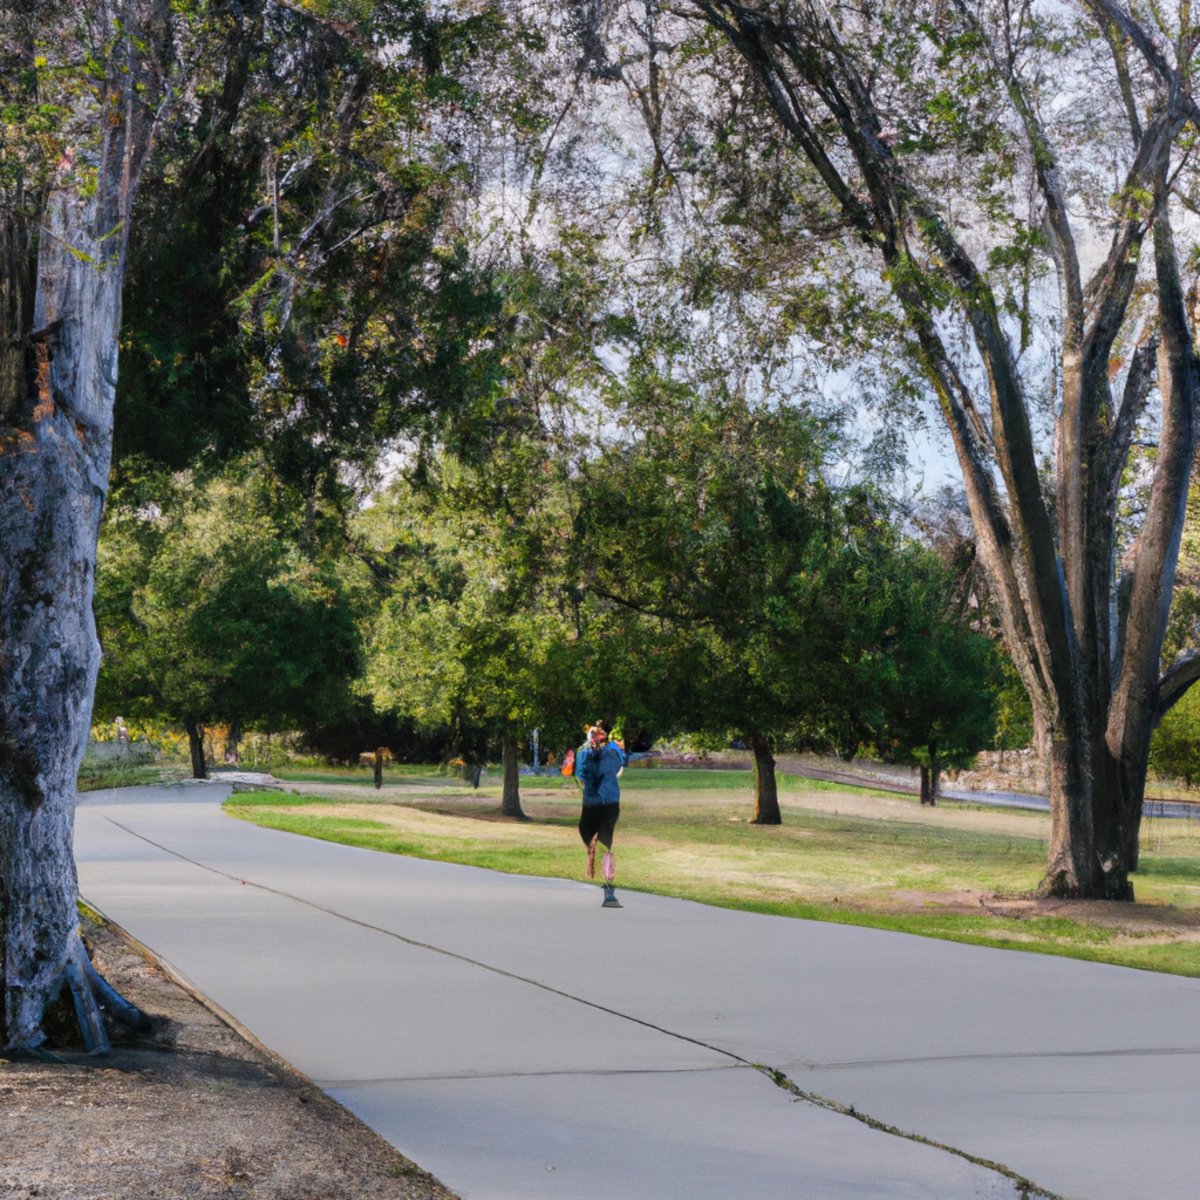 Person jogging in park surrounded by nature - Maple Syrup Urine Disease (MSUD)